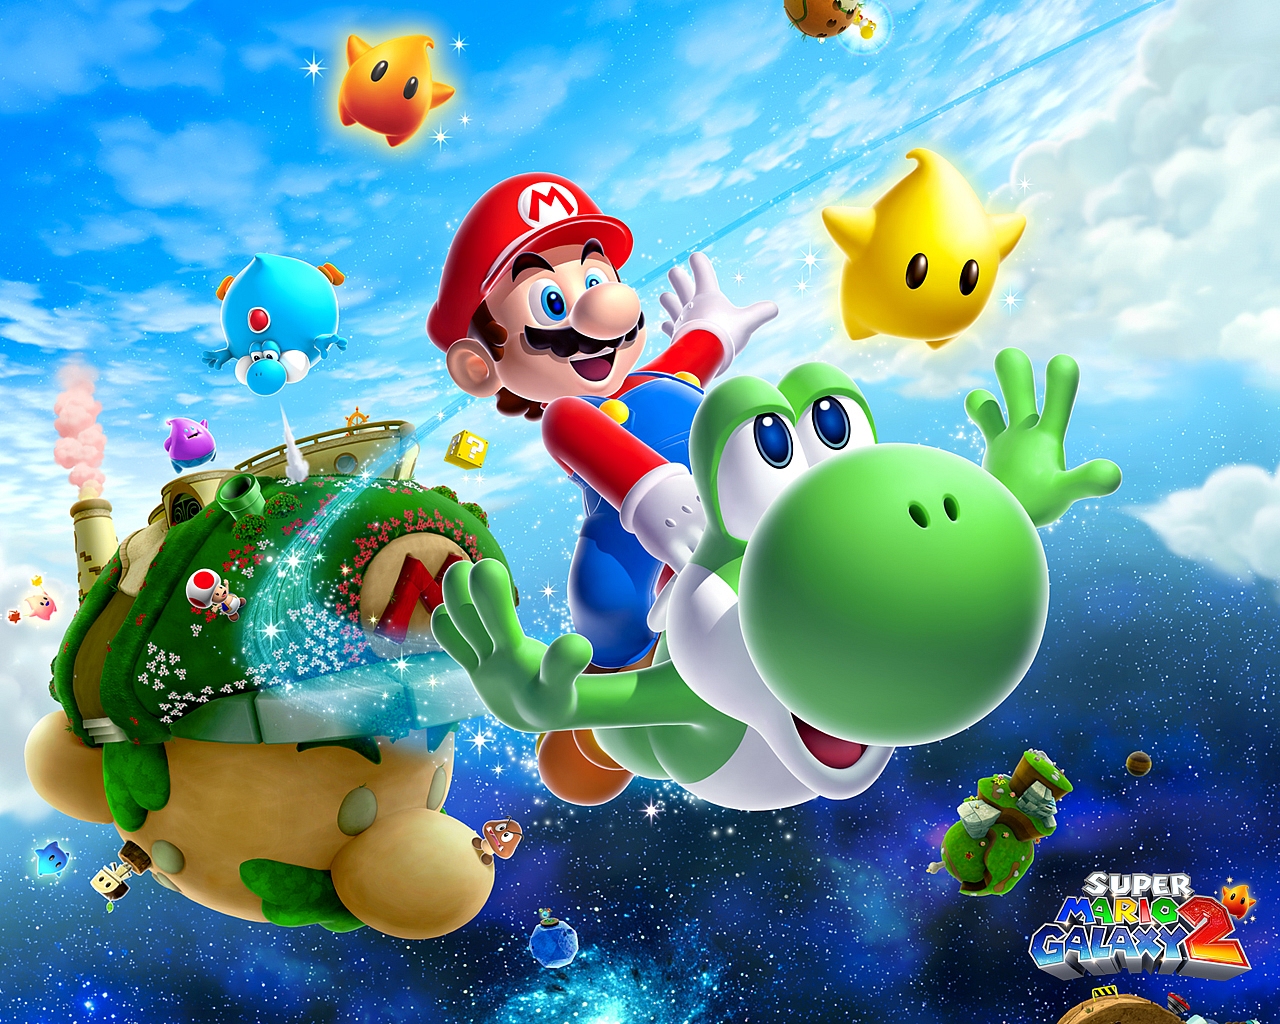 To Use This Super Mario Brothers Picture As Your Desktop Wallpaper